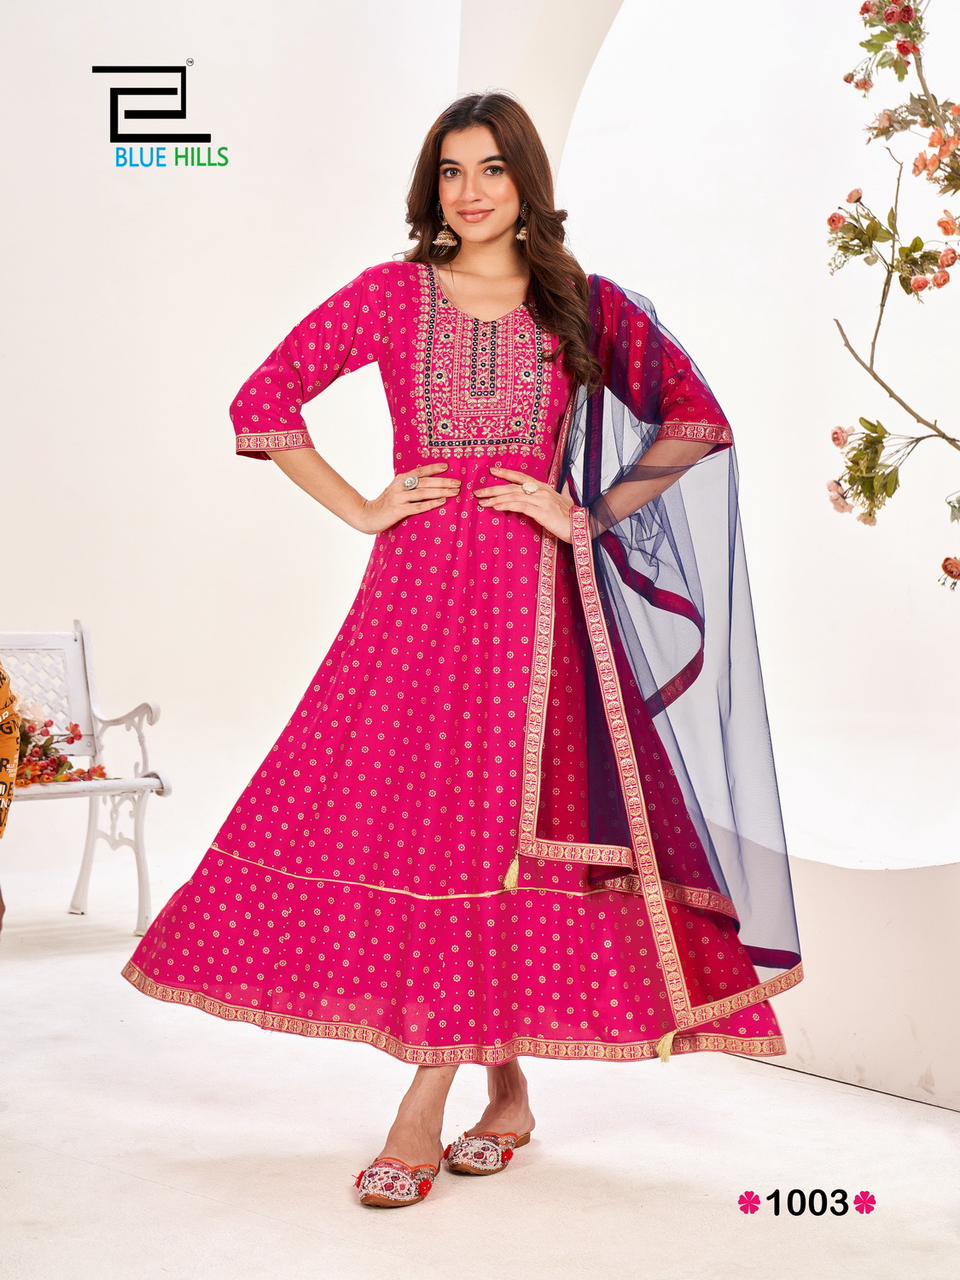 Blue Hills Manika Mage Hithe Vol 20 collection 3